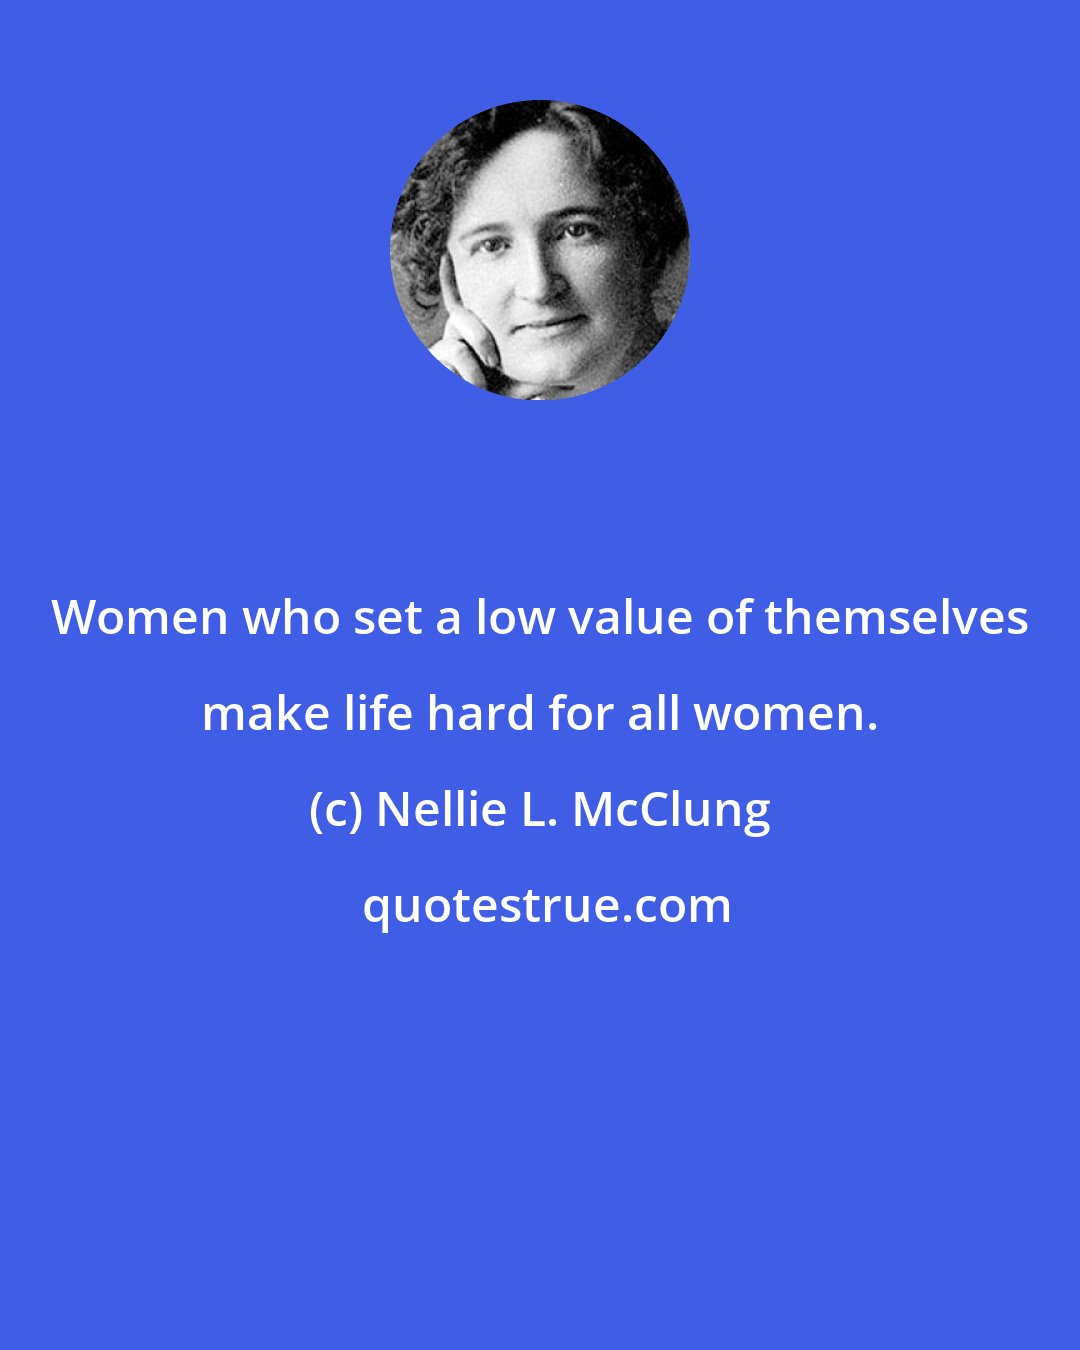 Nellie L. McClung: Women who set a low value of themselves make life hard for all women.